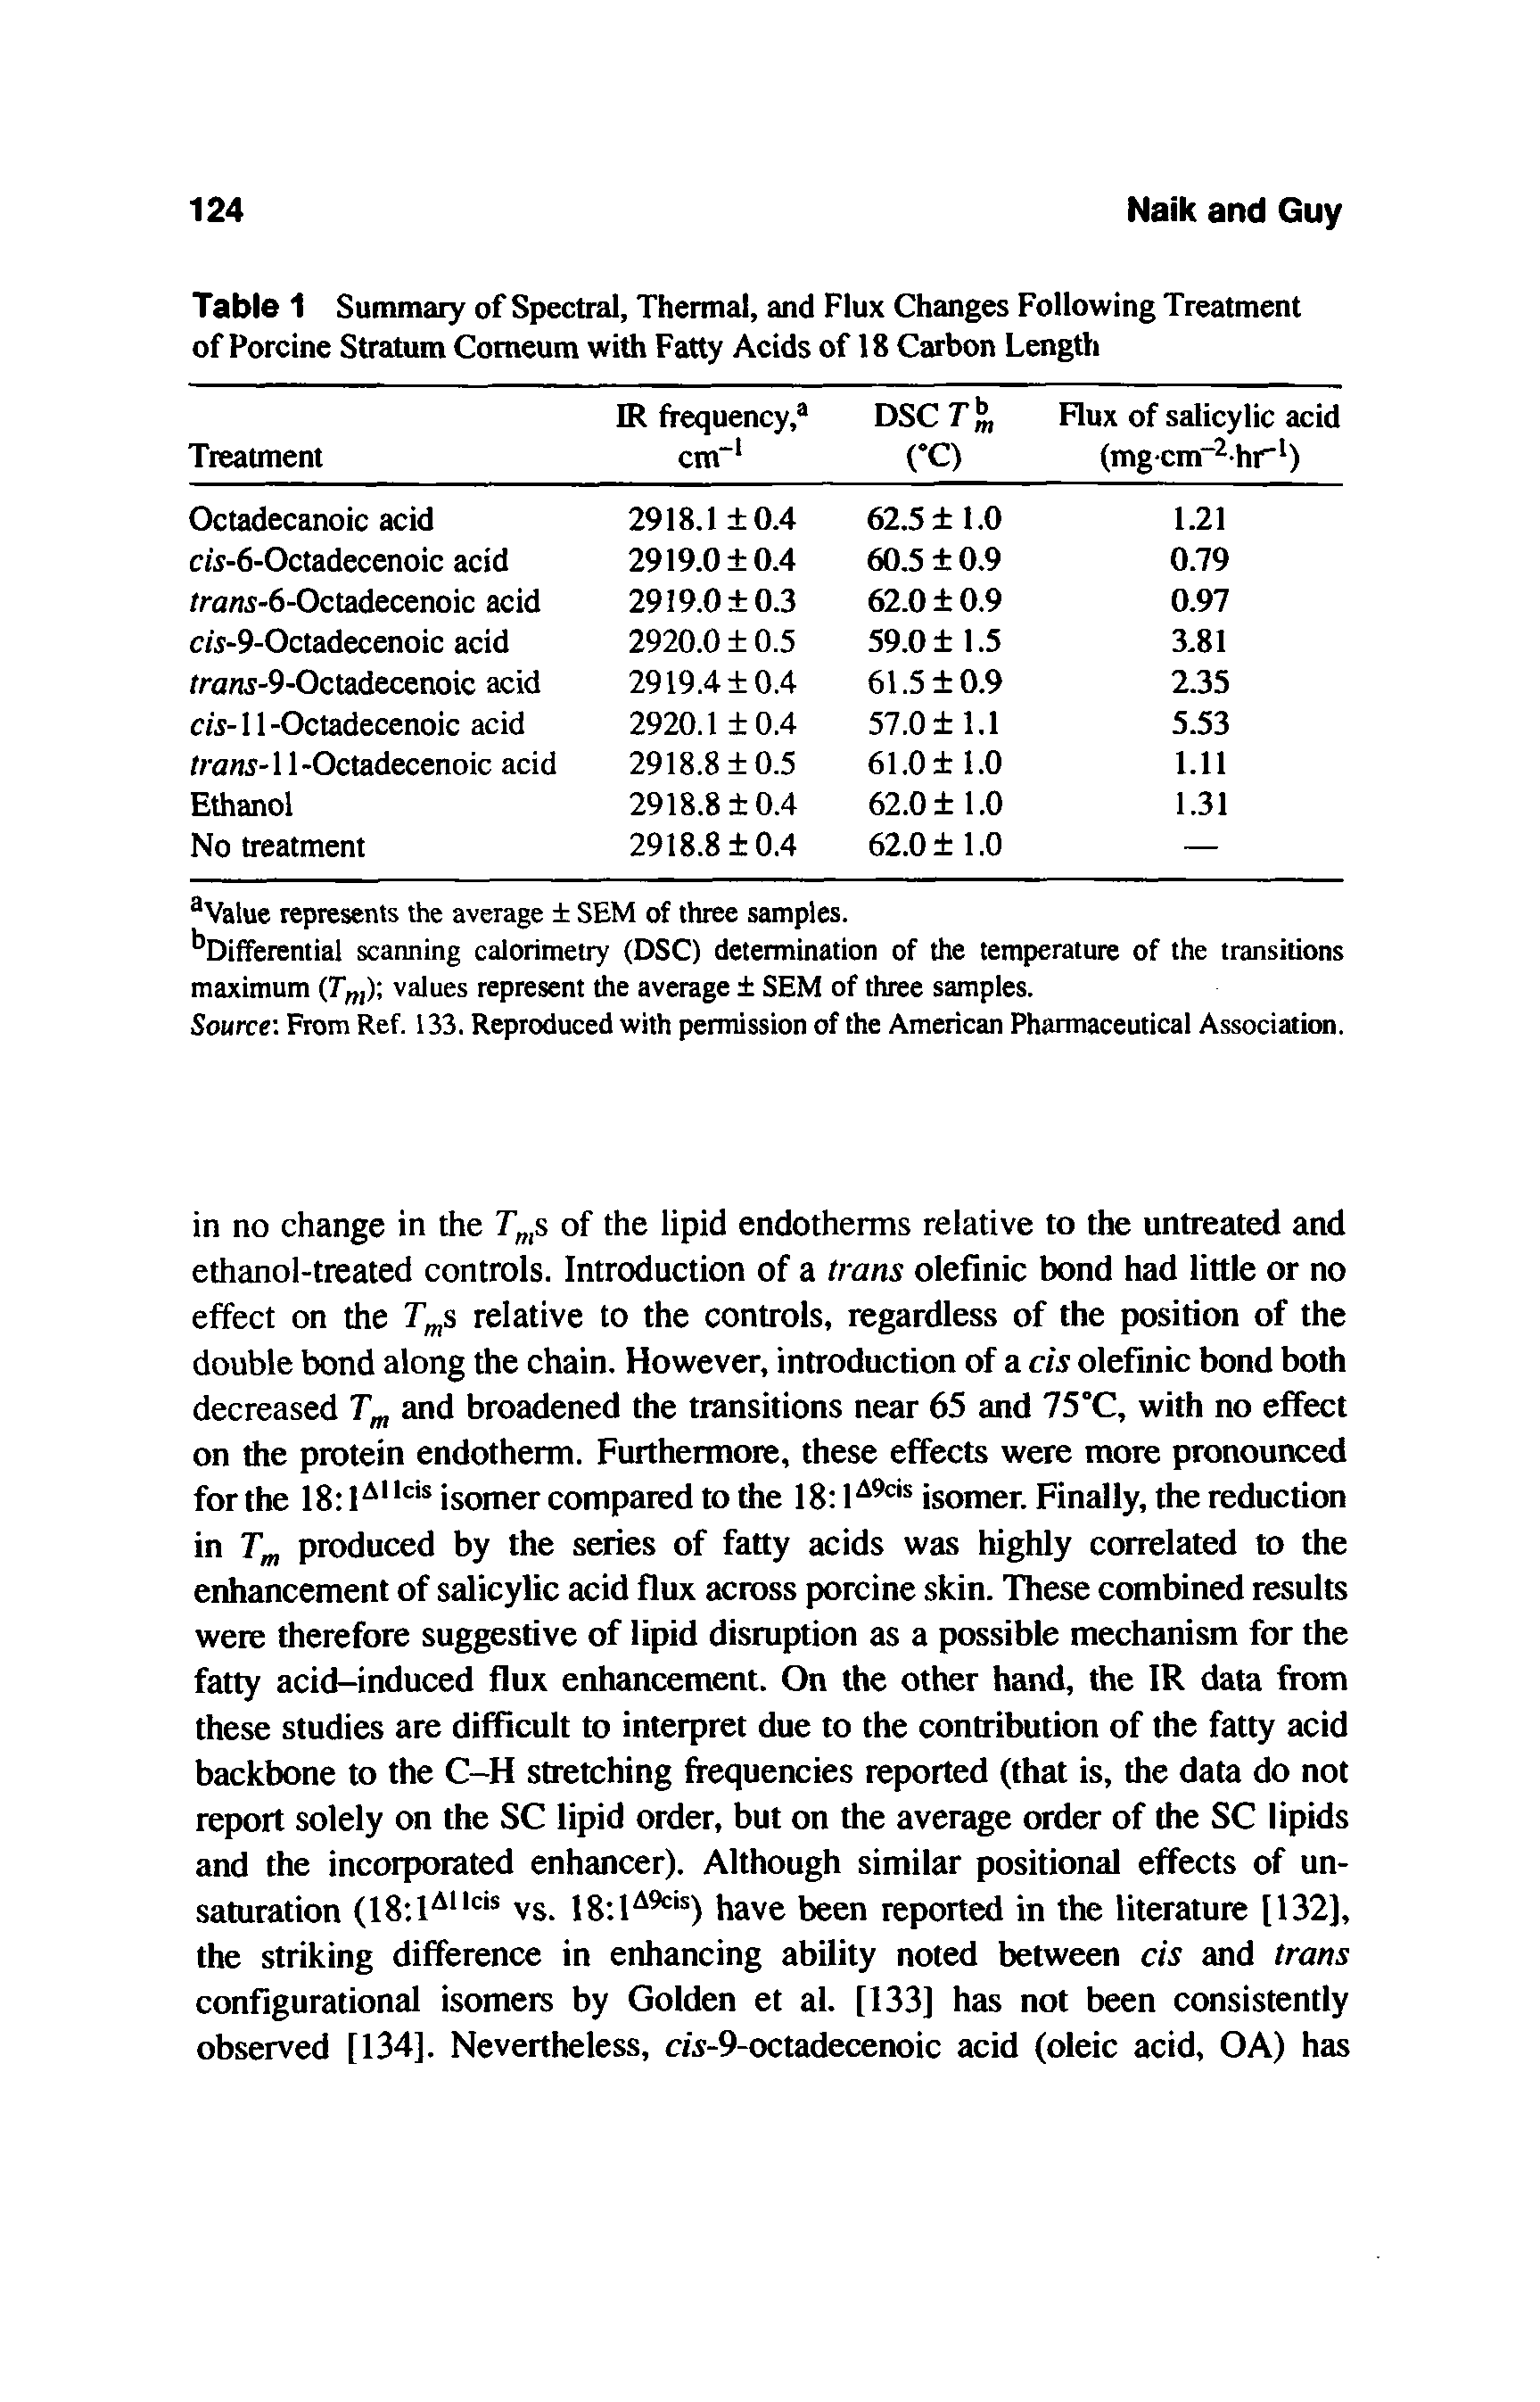 Table 1 Summary of Spectral, Thermal, and Flux Changes Following Treatment of Porcine Stratum Comeum with Fatty Acids of 18 Carbon Length...